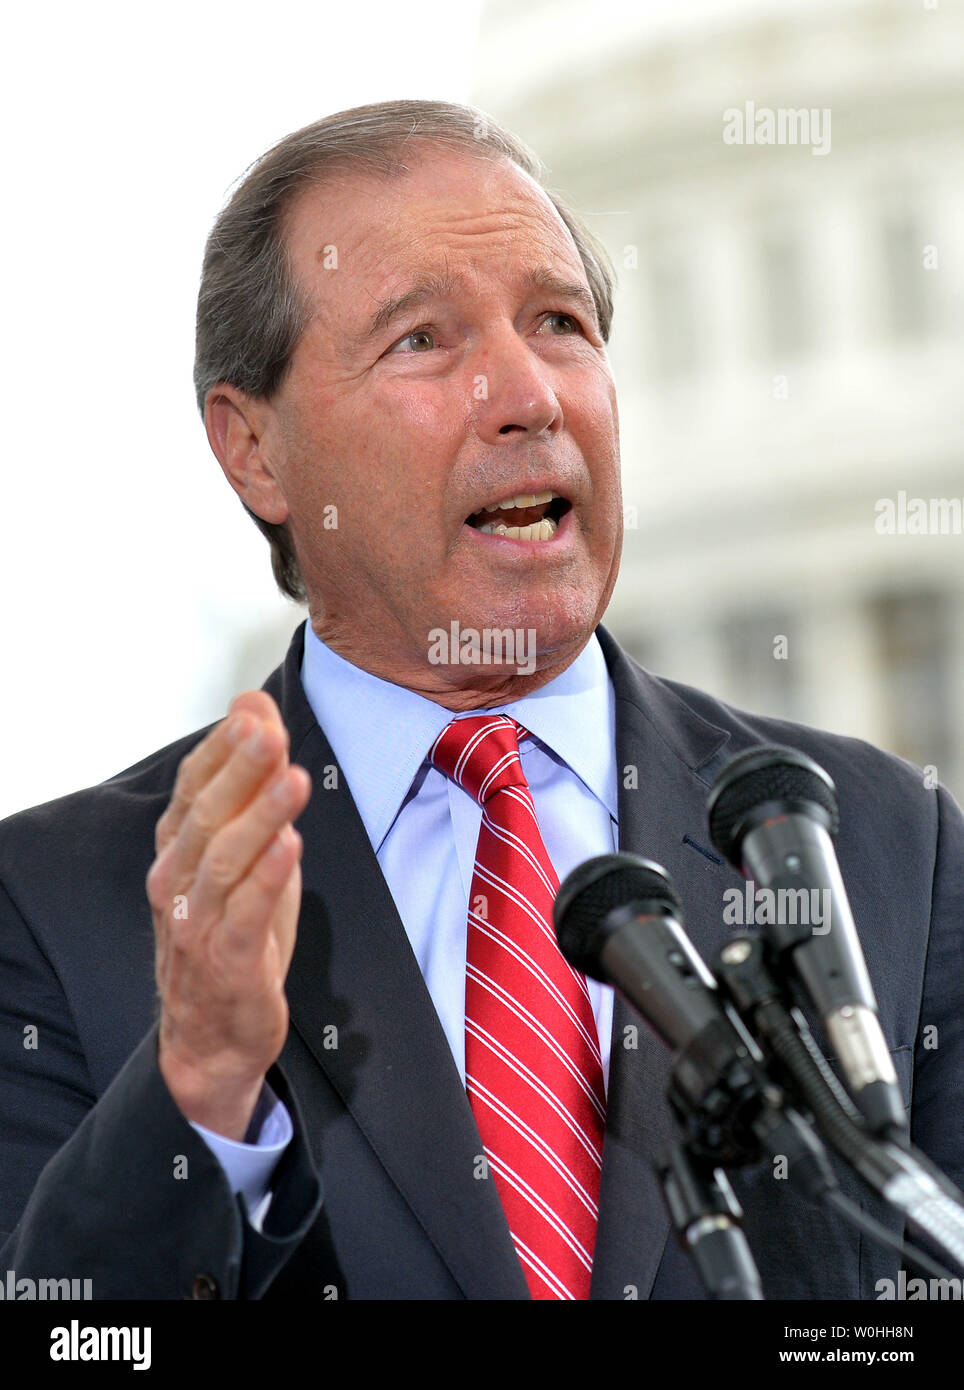 Sen. Tom Udall, D-NM, is joined by fellow Senators and Representatives as he speaks on campaign finance reform during a press conference on Capitol Hill on September 8, 2014. Udall is the co-sponsor  of bill SJ Res 19, an amendment to the constitution setting limits on campaign spending and to overturn the Citizens United Supreme Court ruling.  UPI/Kevin Dietsch Stock Photo